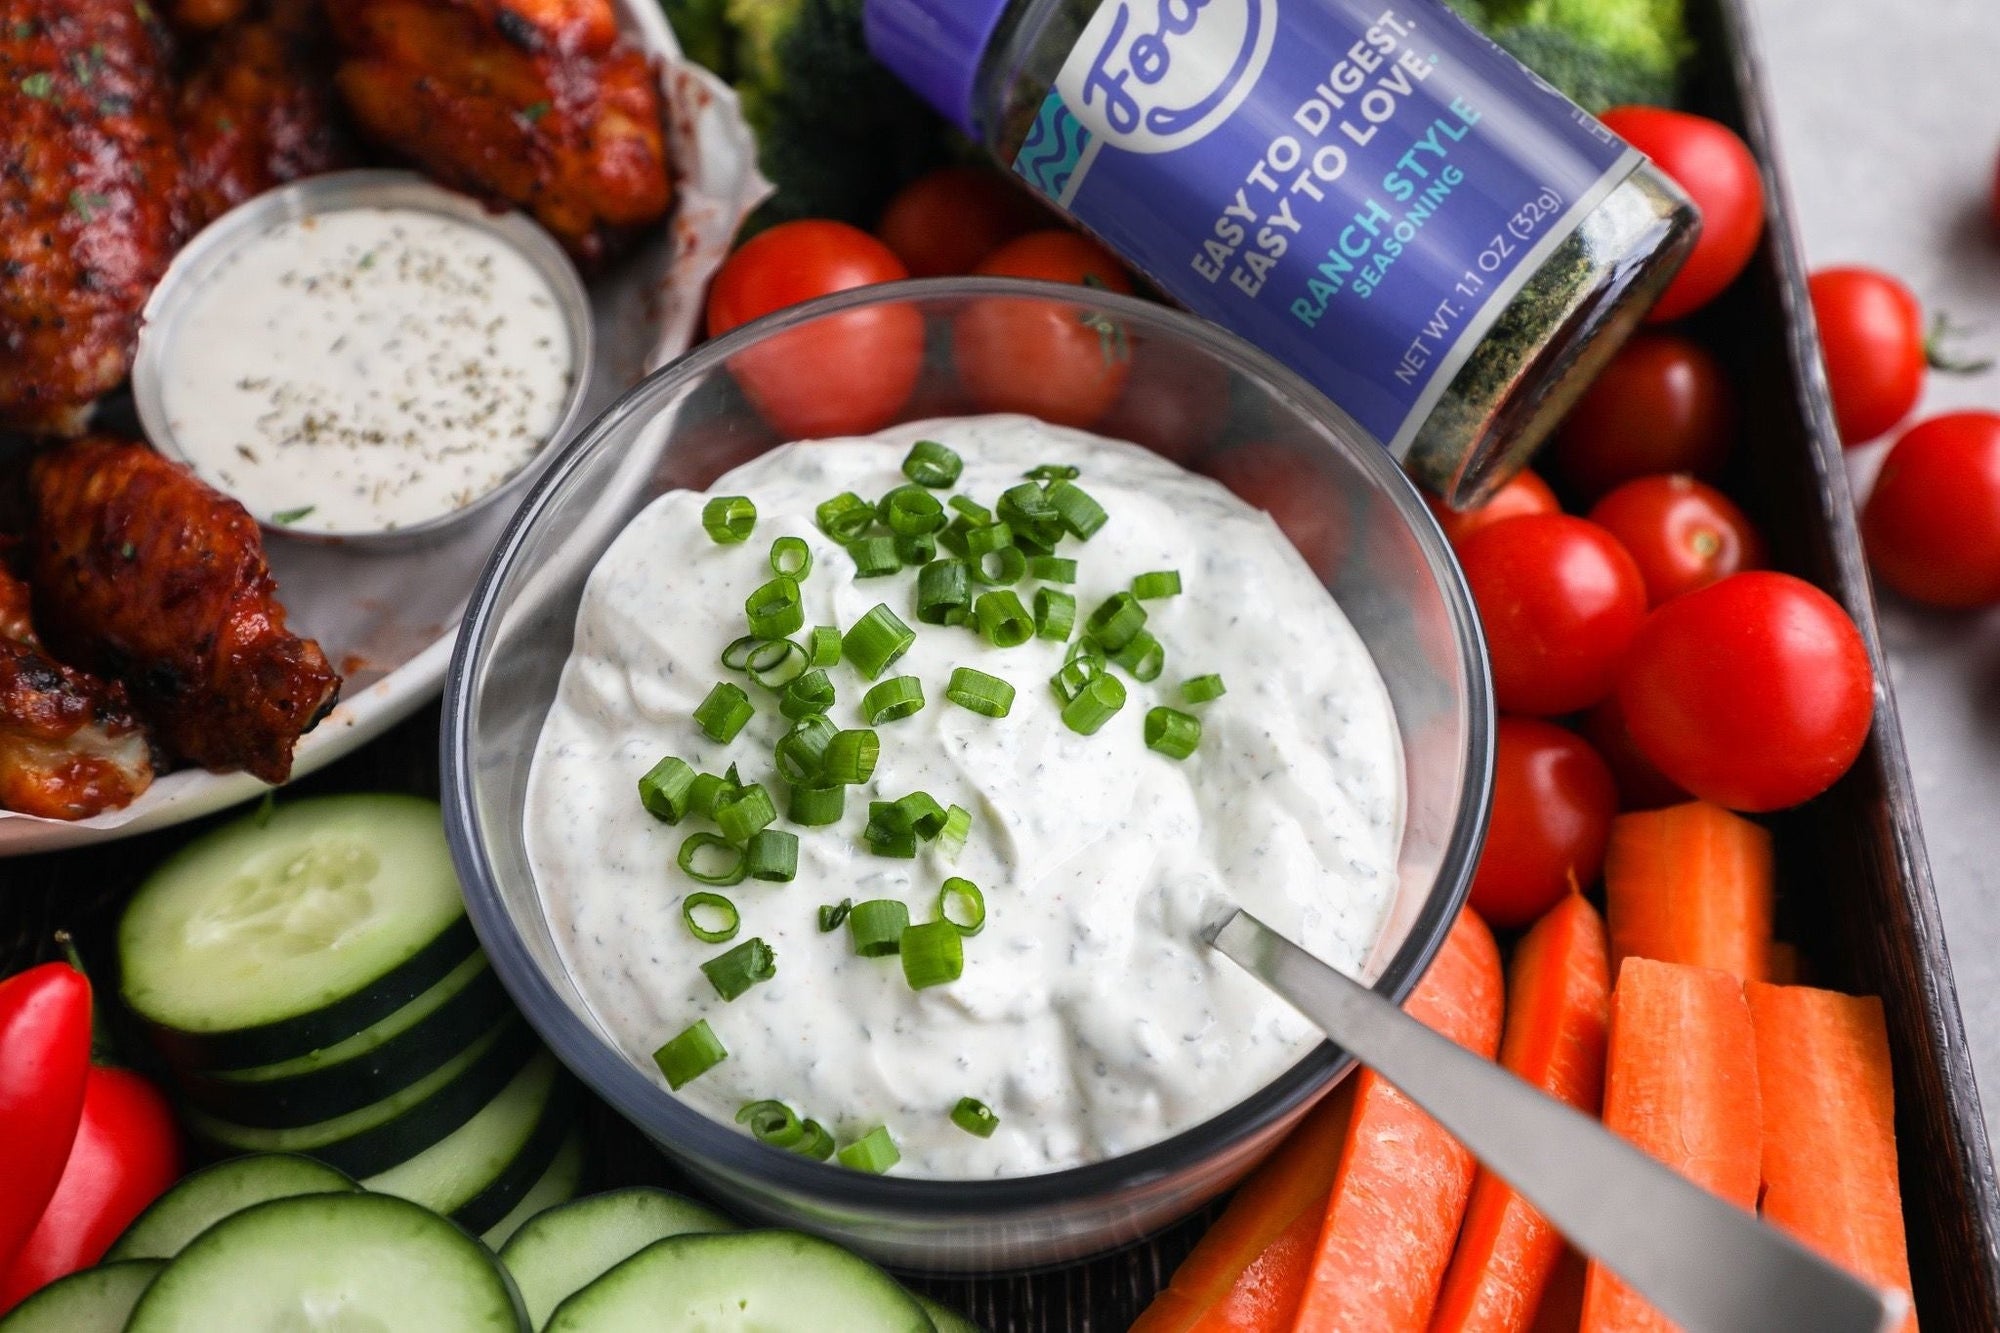 An image of Fody's sliced veggies with homemade ranch dip. Sliced cucumbers, carrots and cherry tomatoes are spread over a plate around a bowl of white homemade ranch dip topped with scallions. 